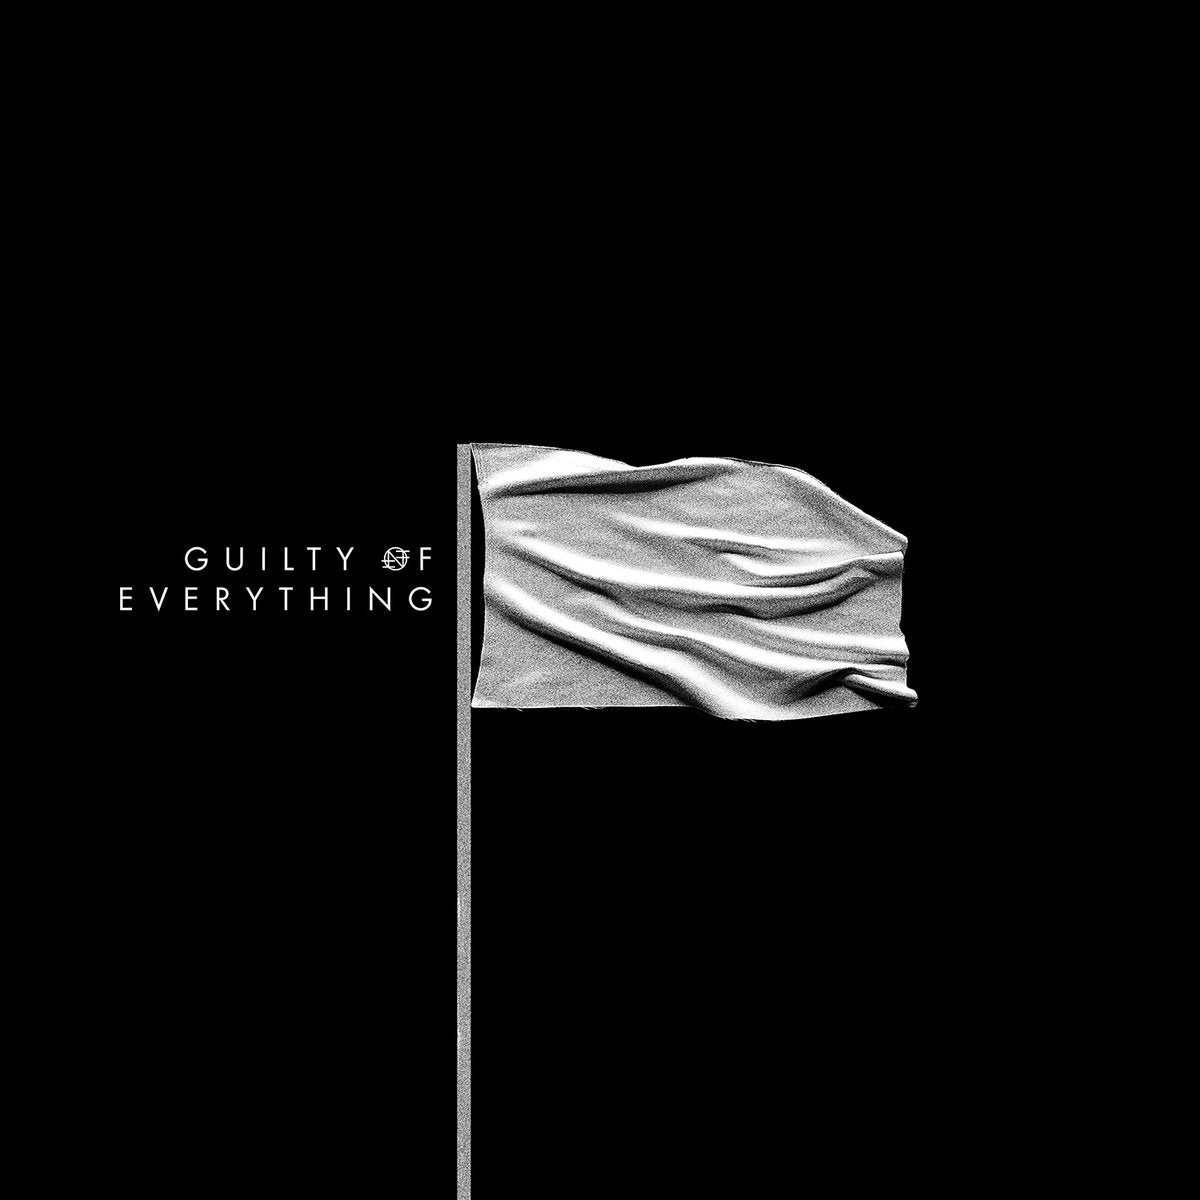 NOTHING - GUILTY OF EVERYTHING Vinyl LP